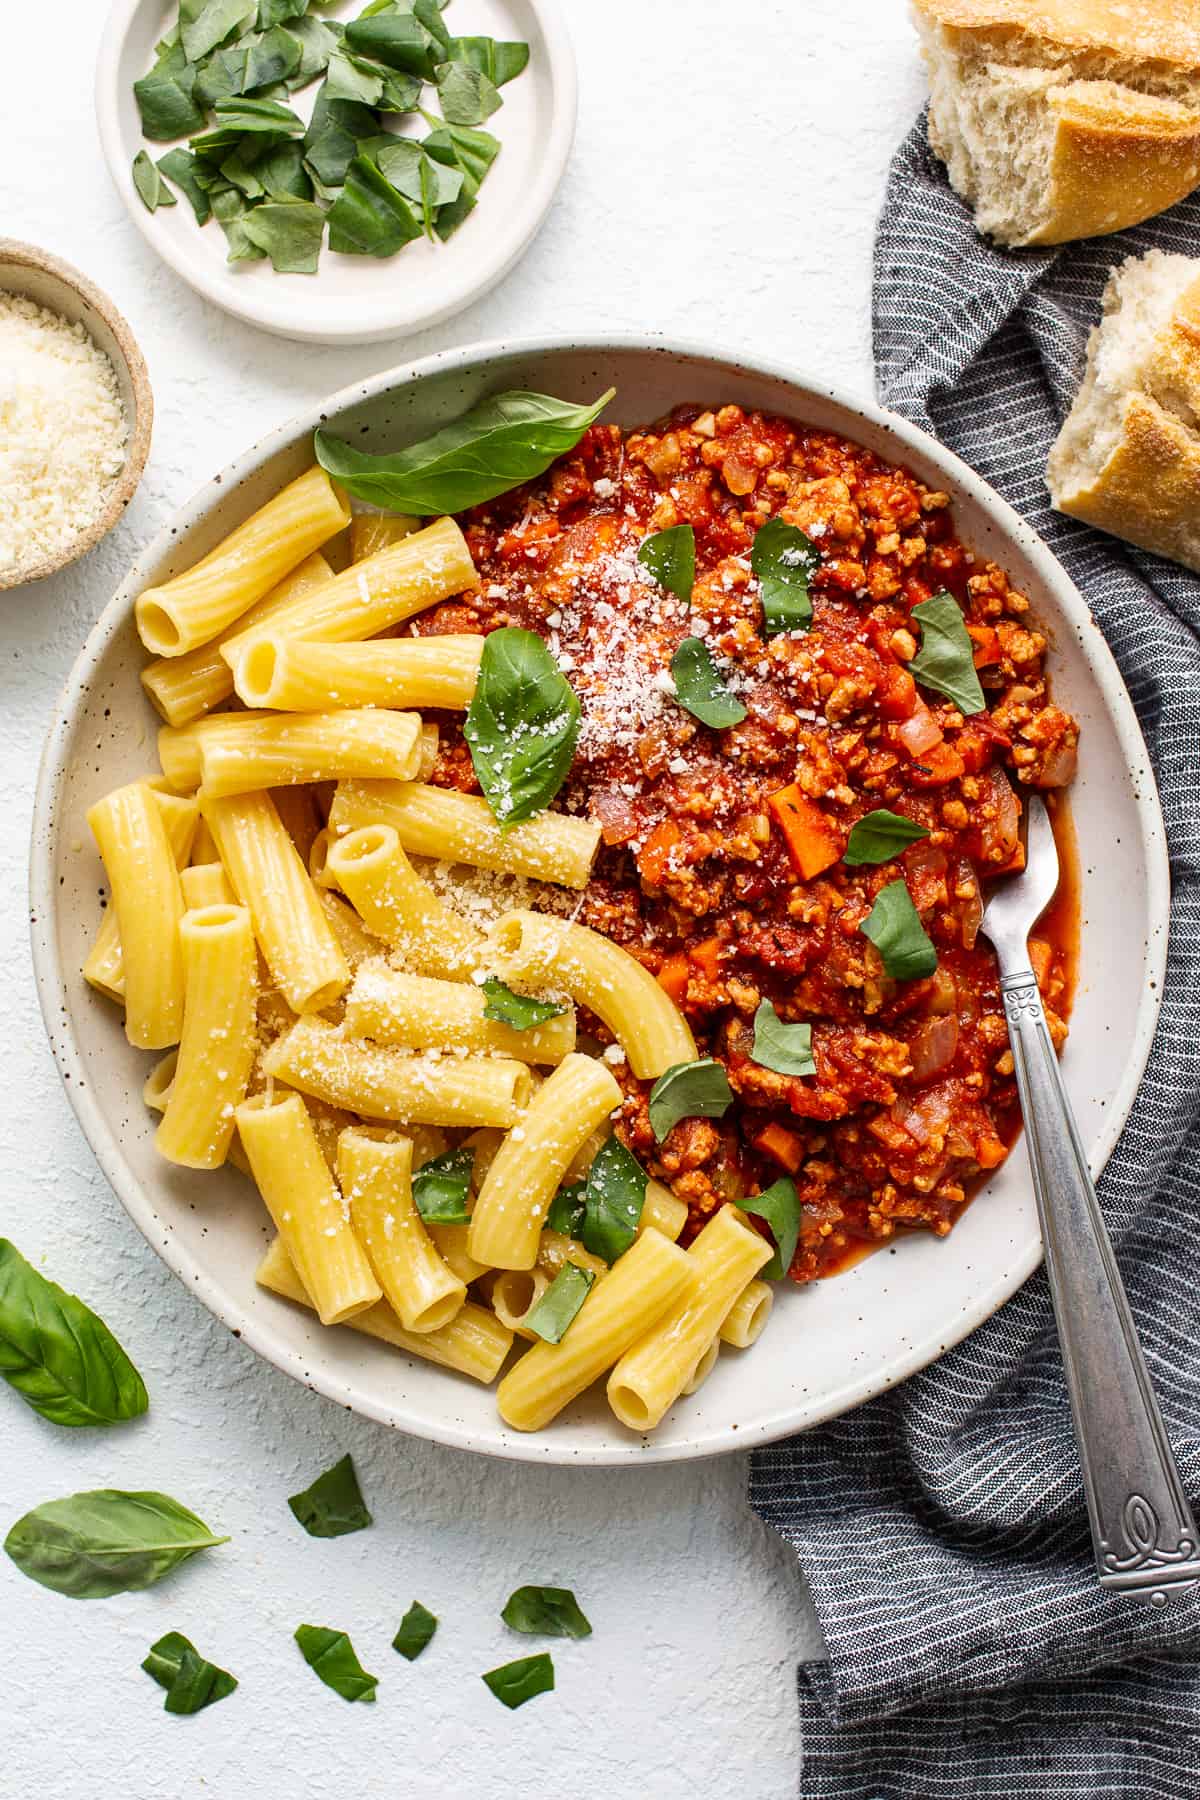 Ground chicken bolognese in a bowl with pasta.